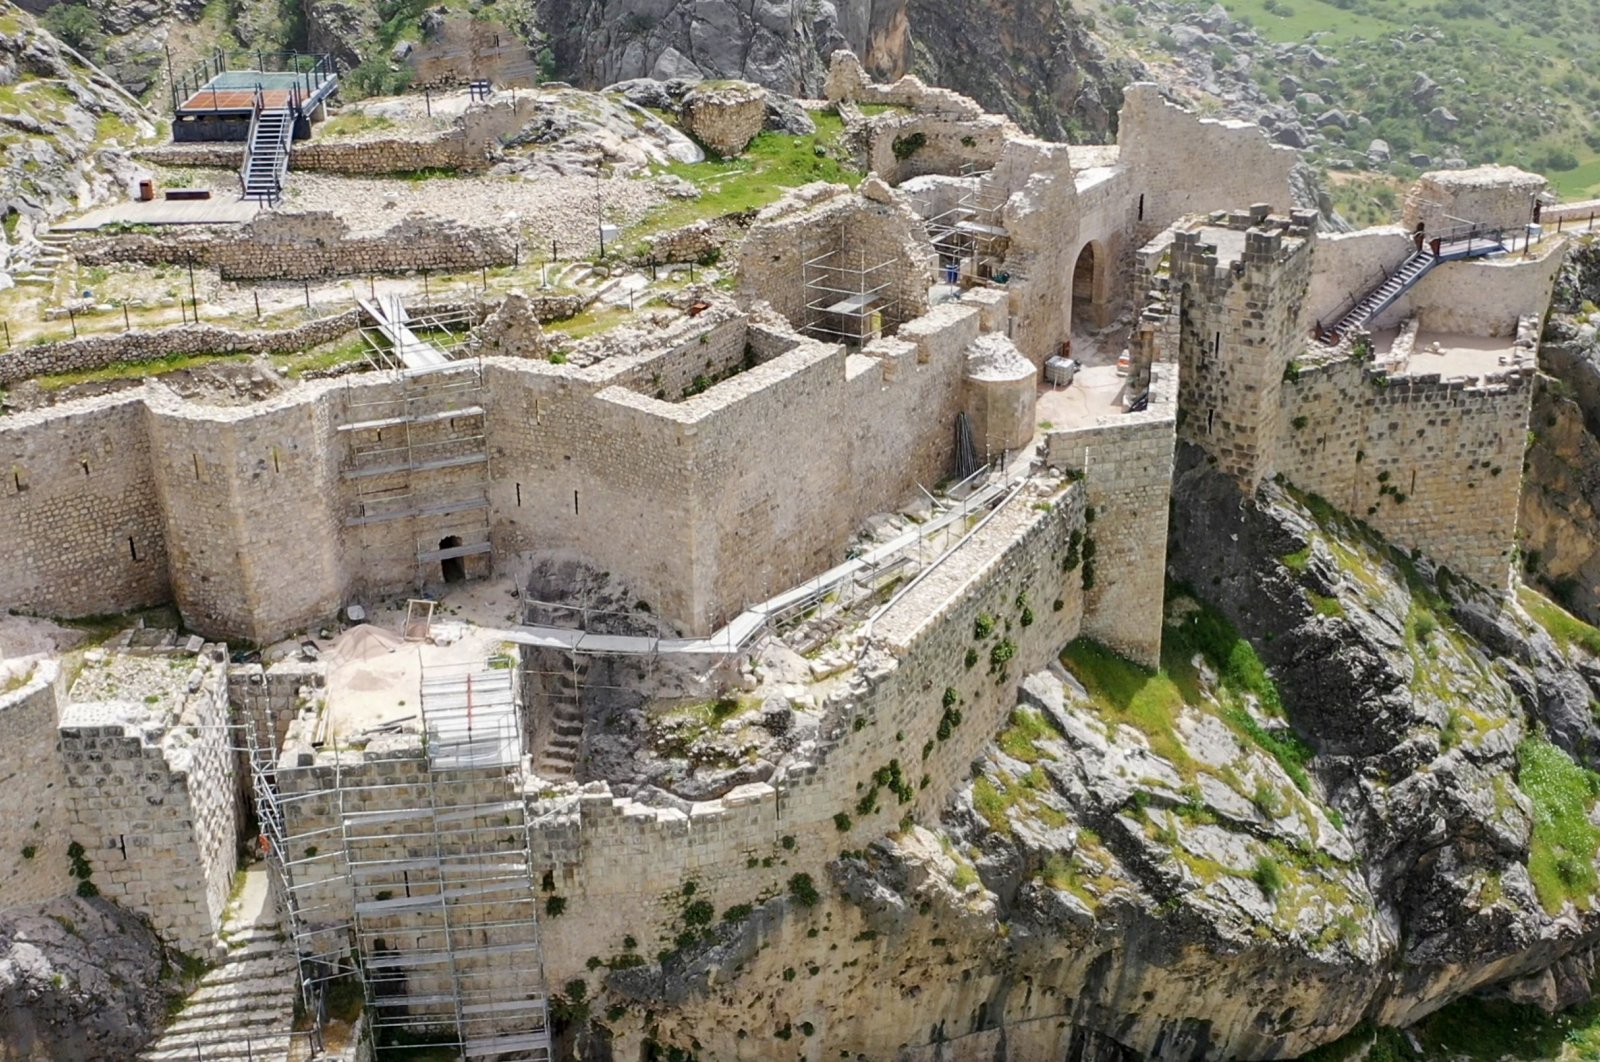 Qahta Castle has been almost completely restored after it was destroyed by the earthquake